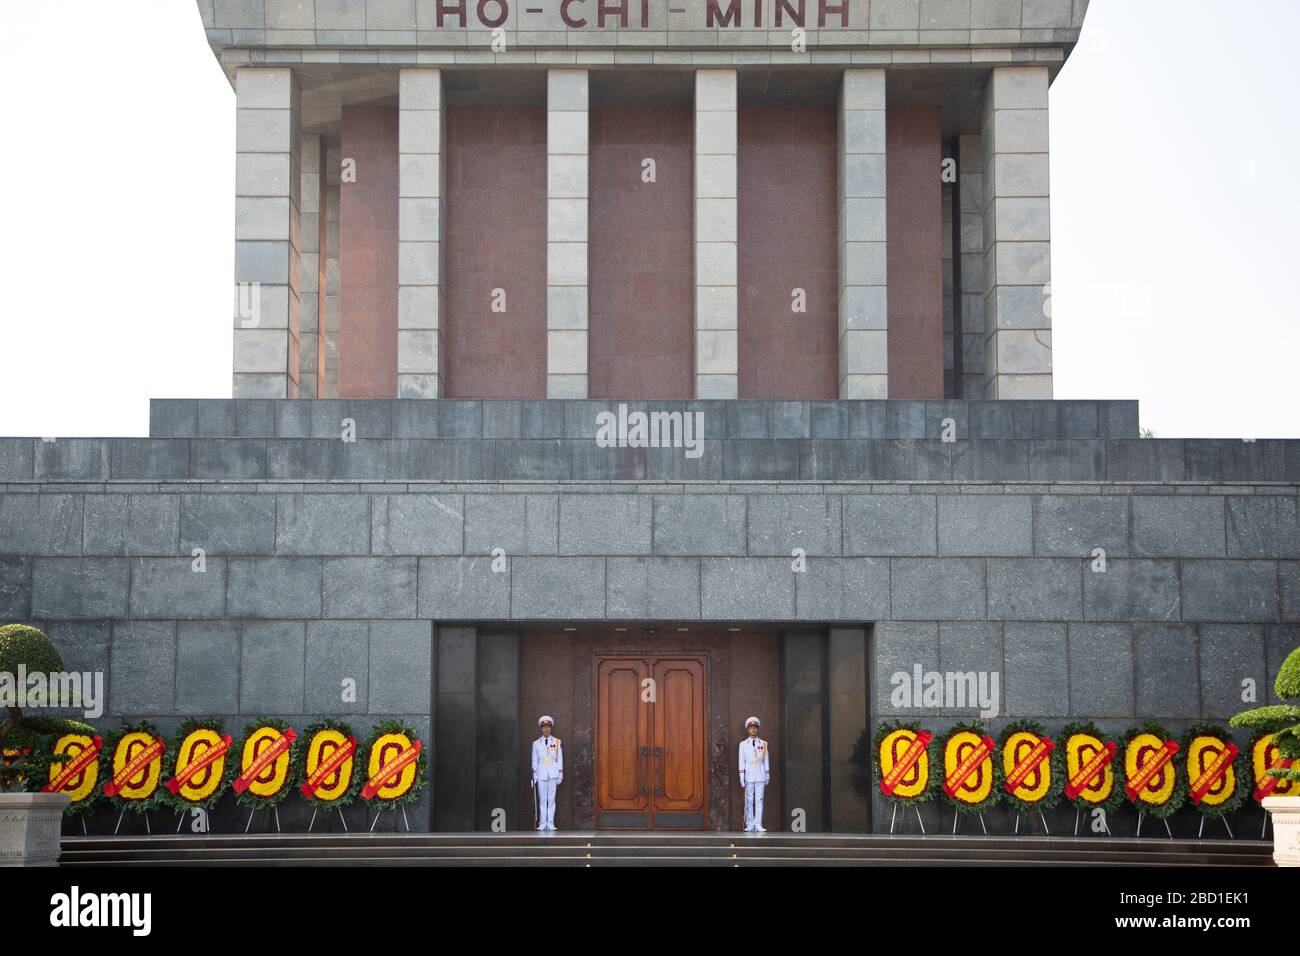 View of the front exterior of the Ho Chi Minh Mausoleum with Guards standing at the entrance. Stock Photo